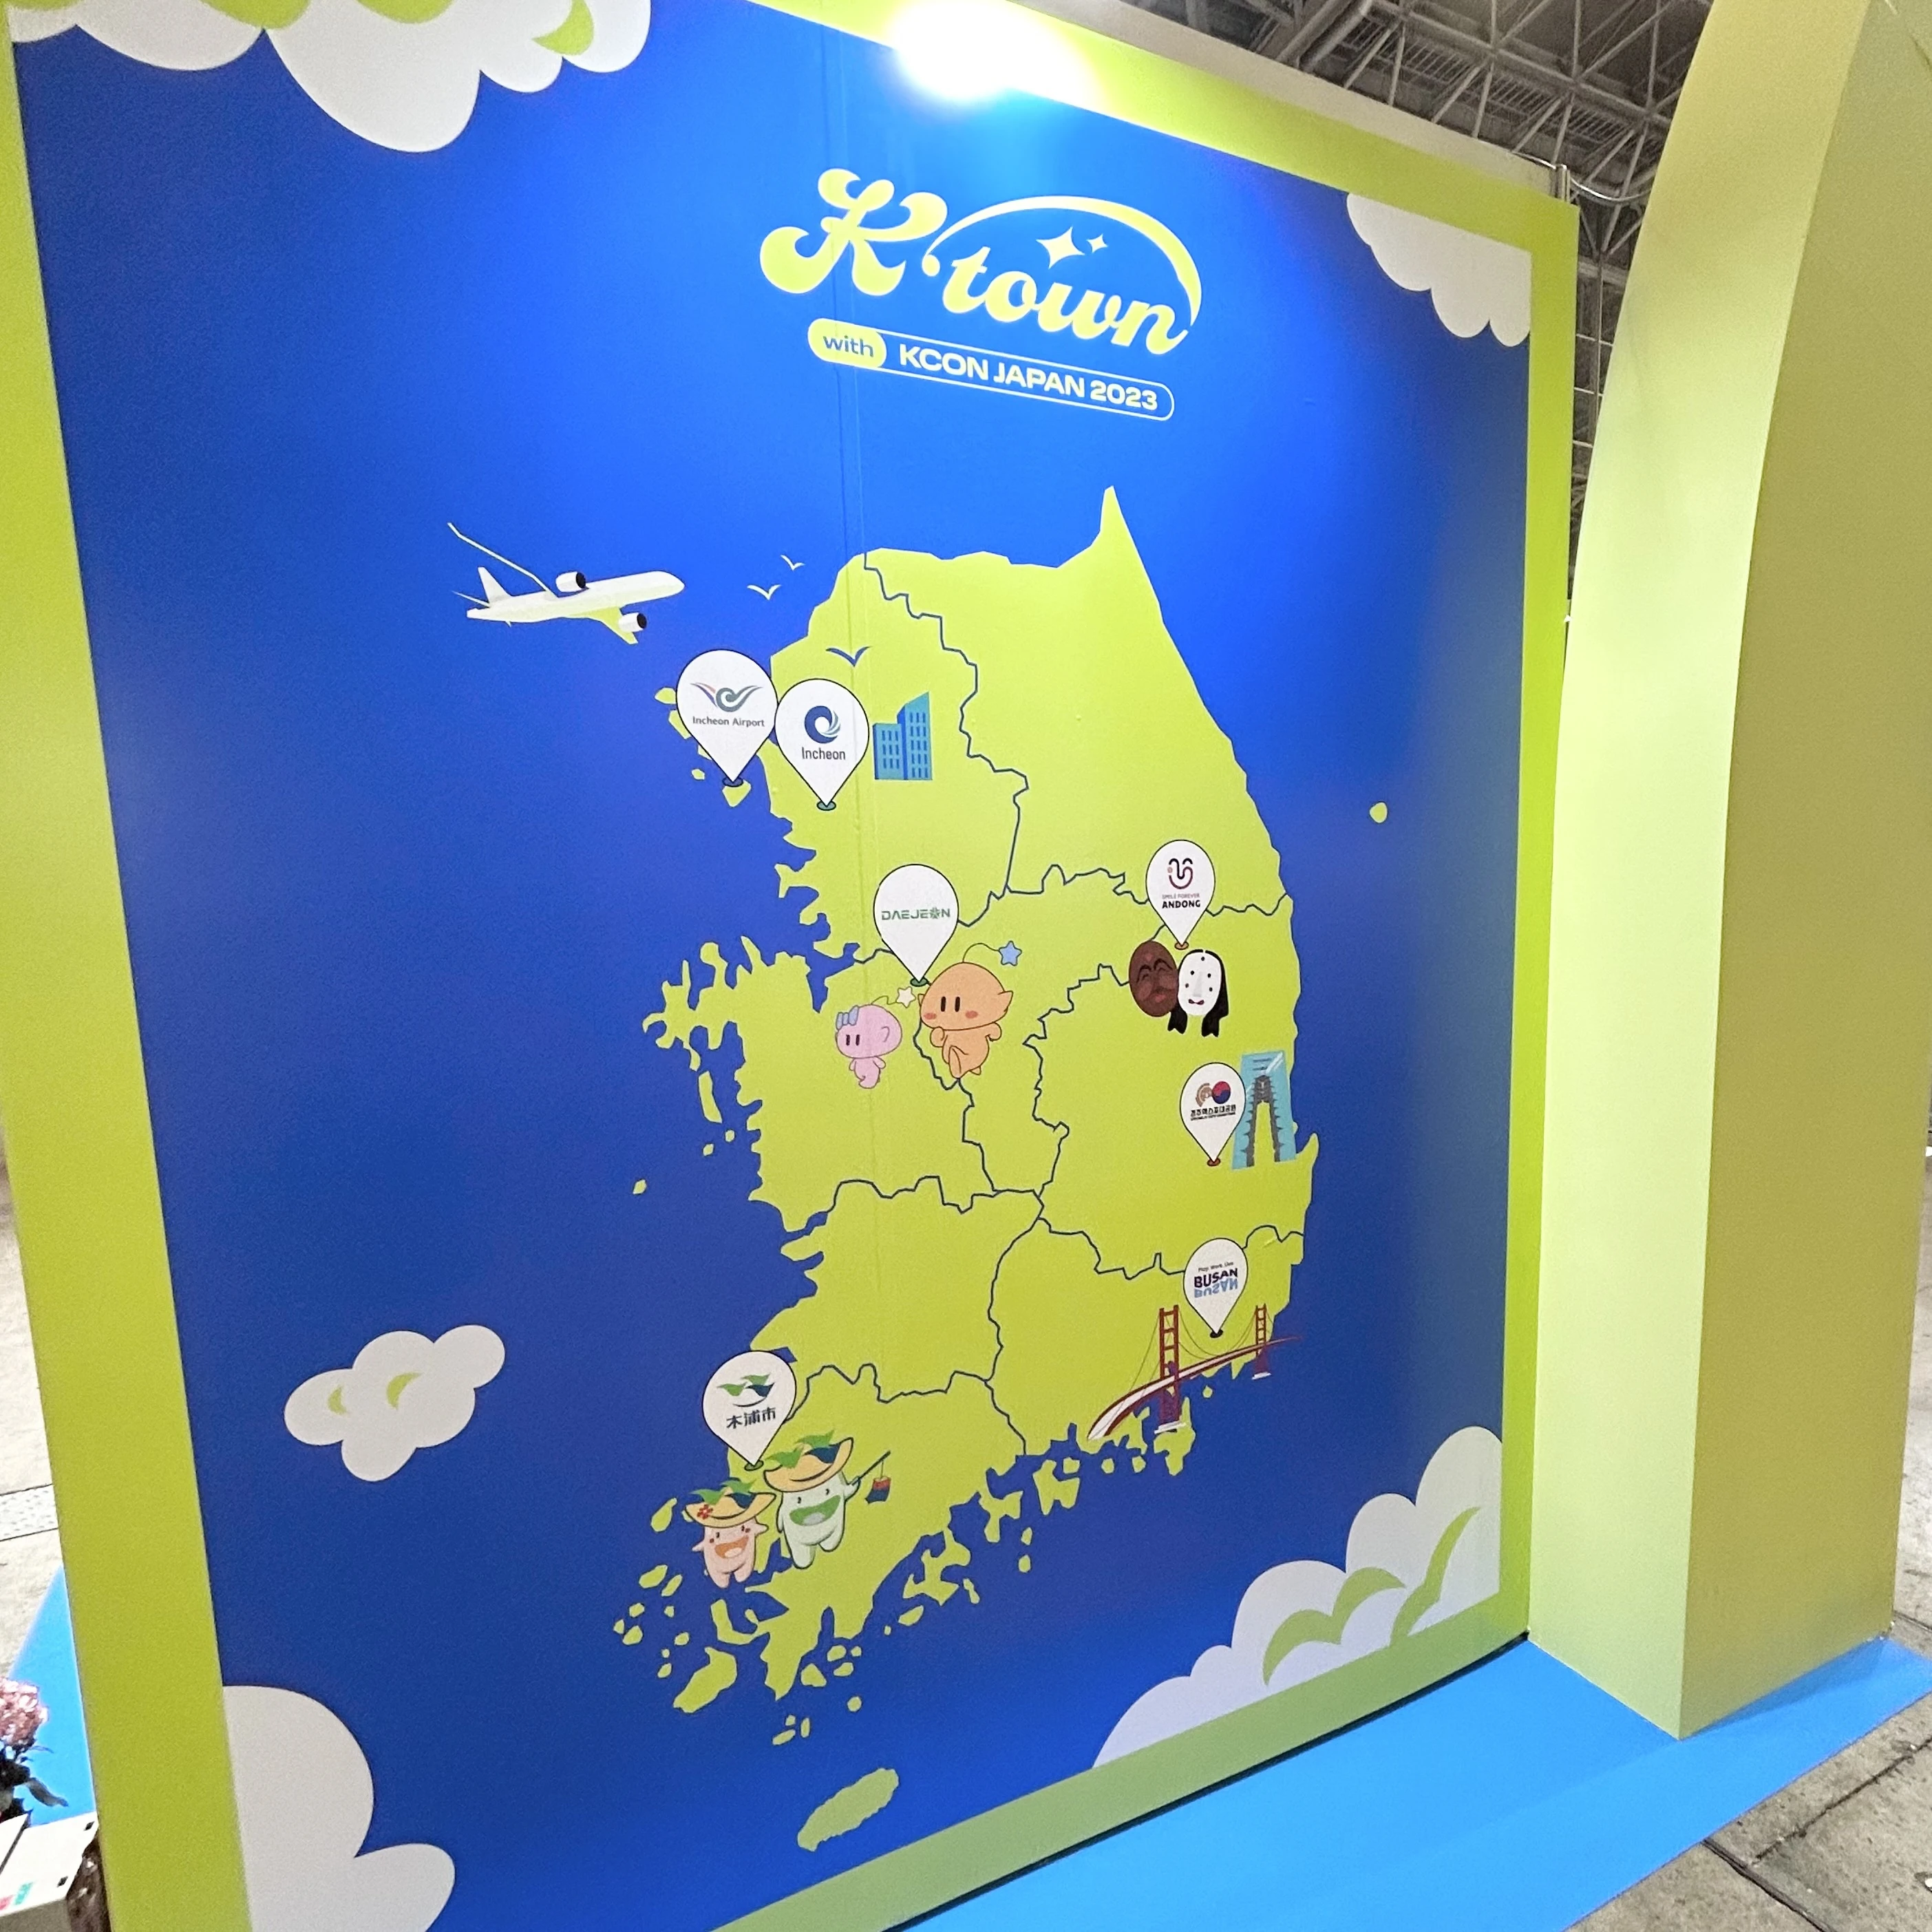 KCON、韓国旅行、コンベンション